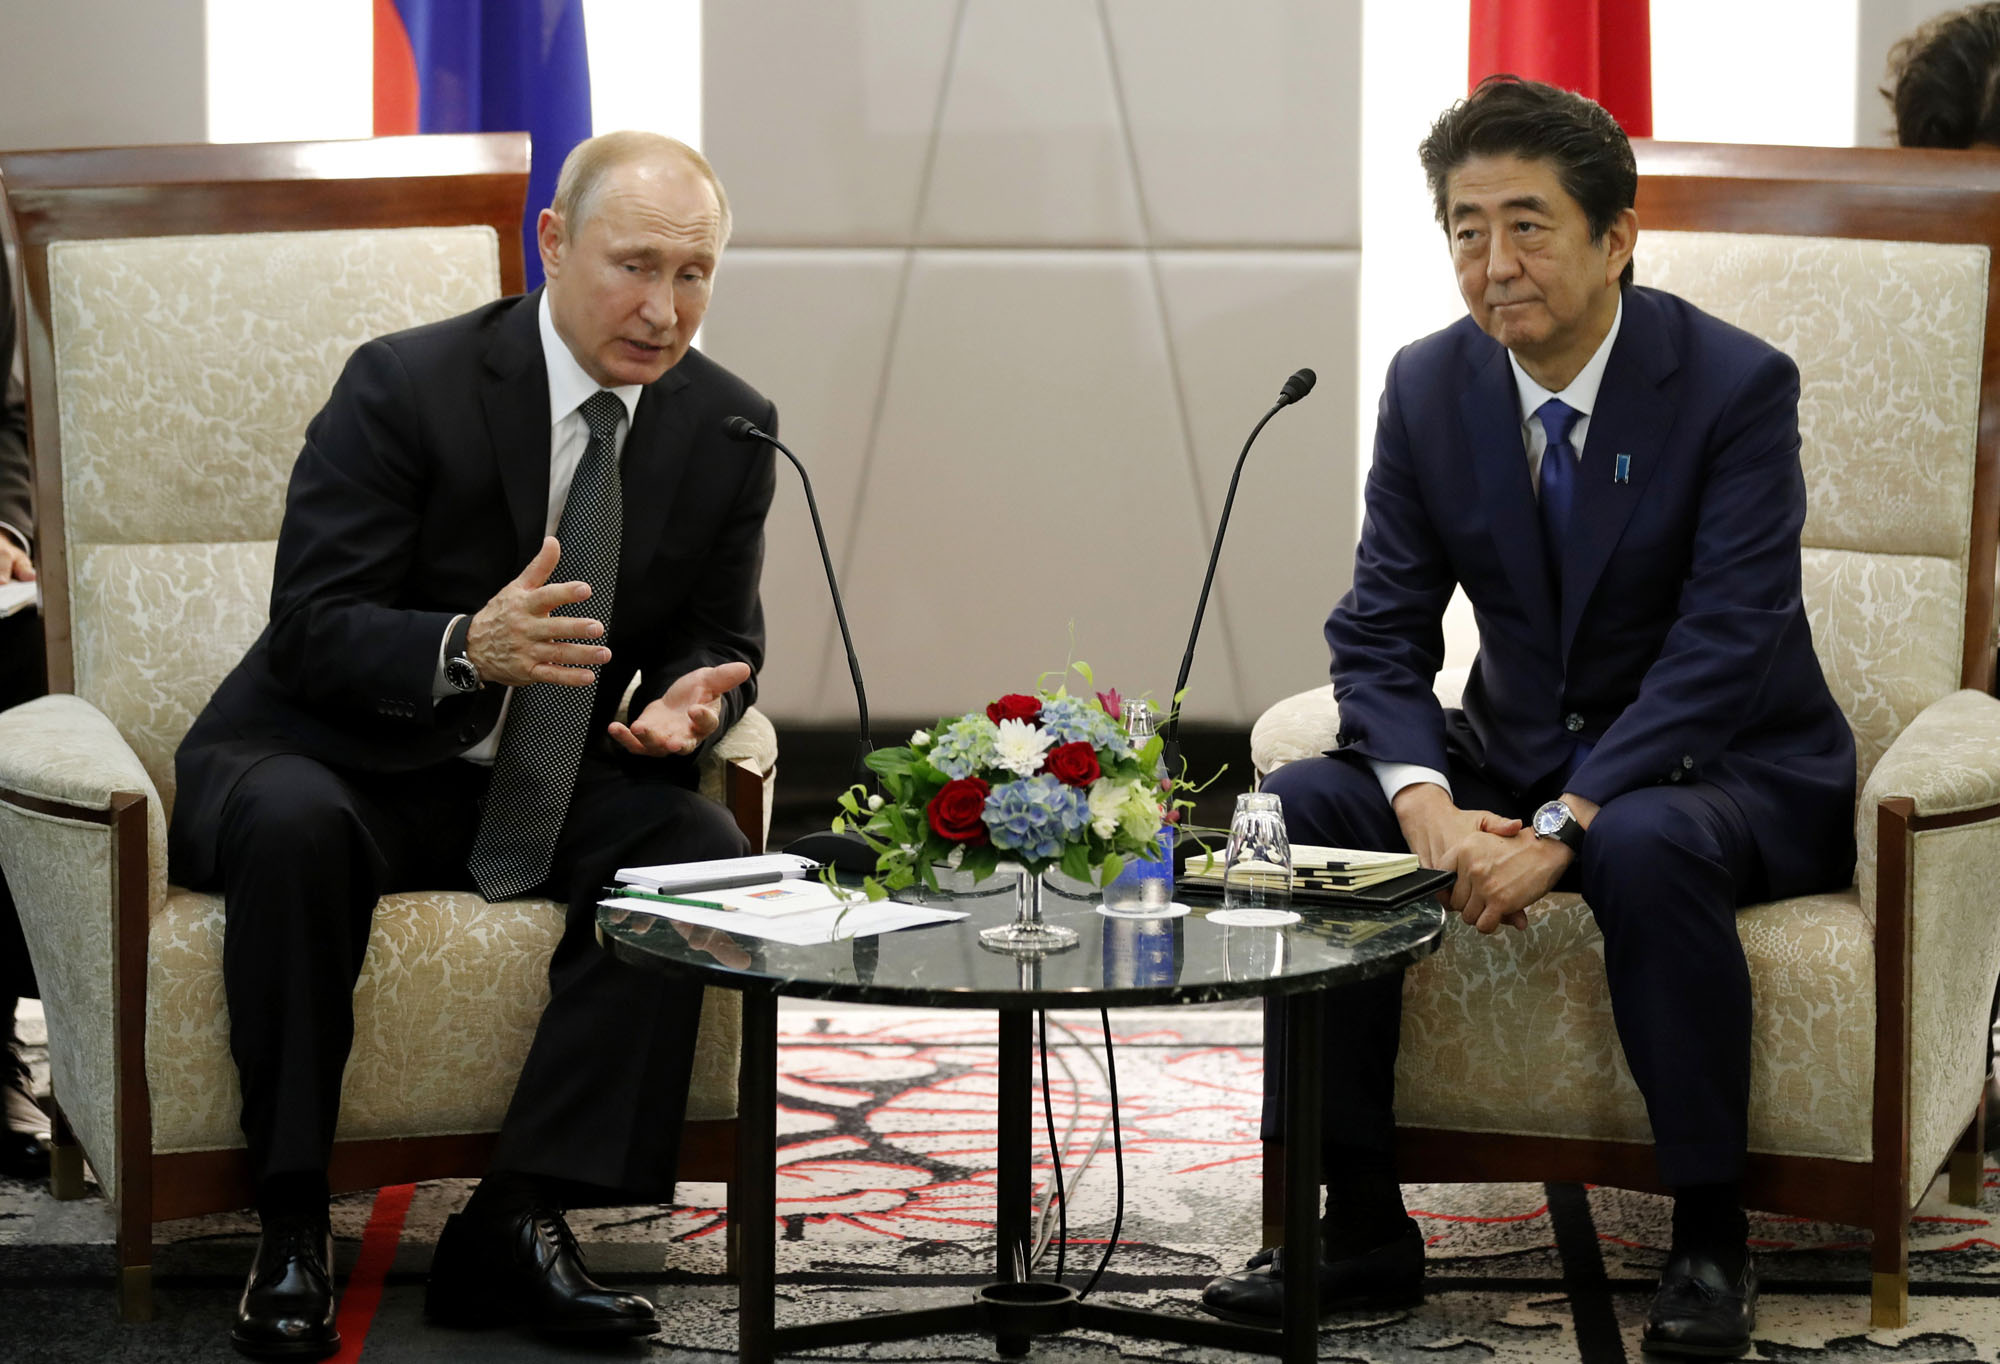 Russian President Vladimir Putin speaks with Prime Minister Shinzo Abe during a bilateral meeting on the sidelines of the G20 summit in Osaka on Saturday. | BLOOMBERG